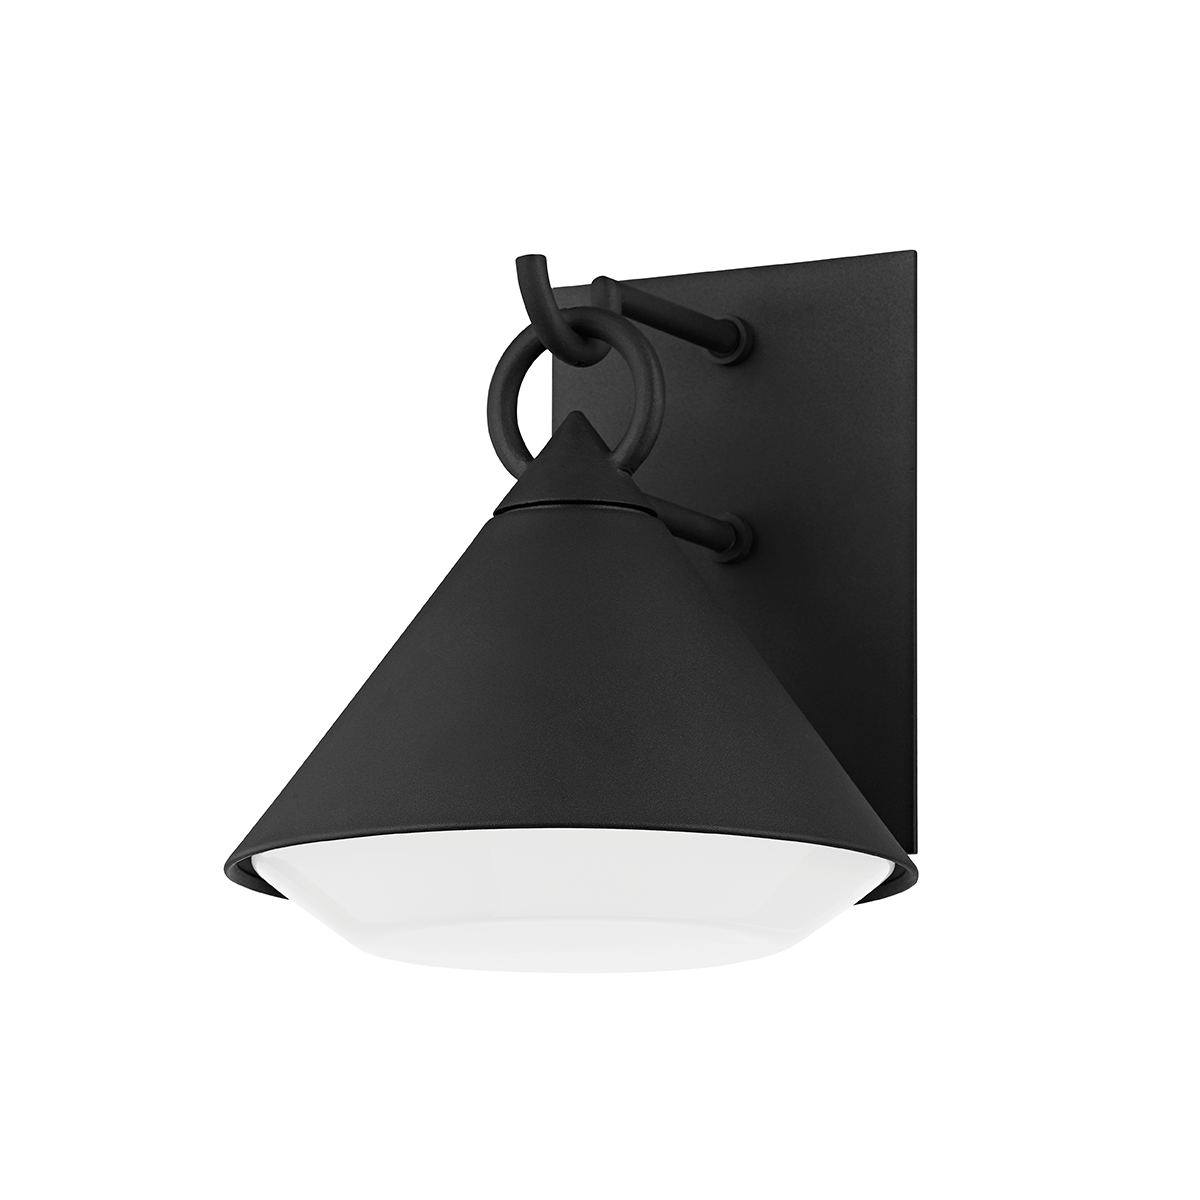 Troy CATALINA 1 LIGHT SMALL EXTERIOR WALL SCONCE B9209 Outdoor l Wall Troy Lighting TEXTURE BLACK  